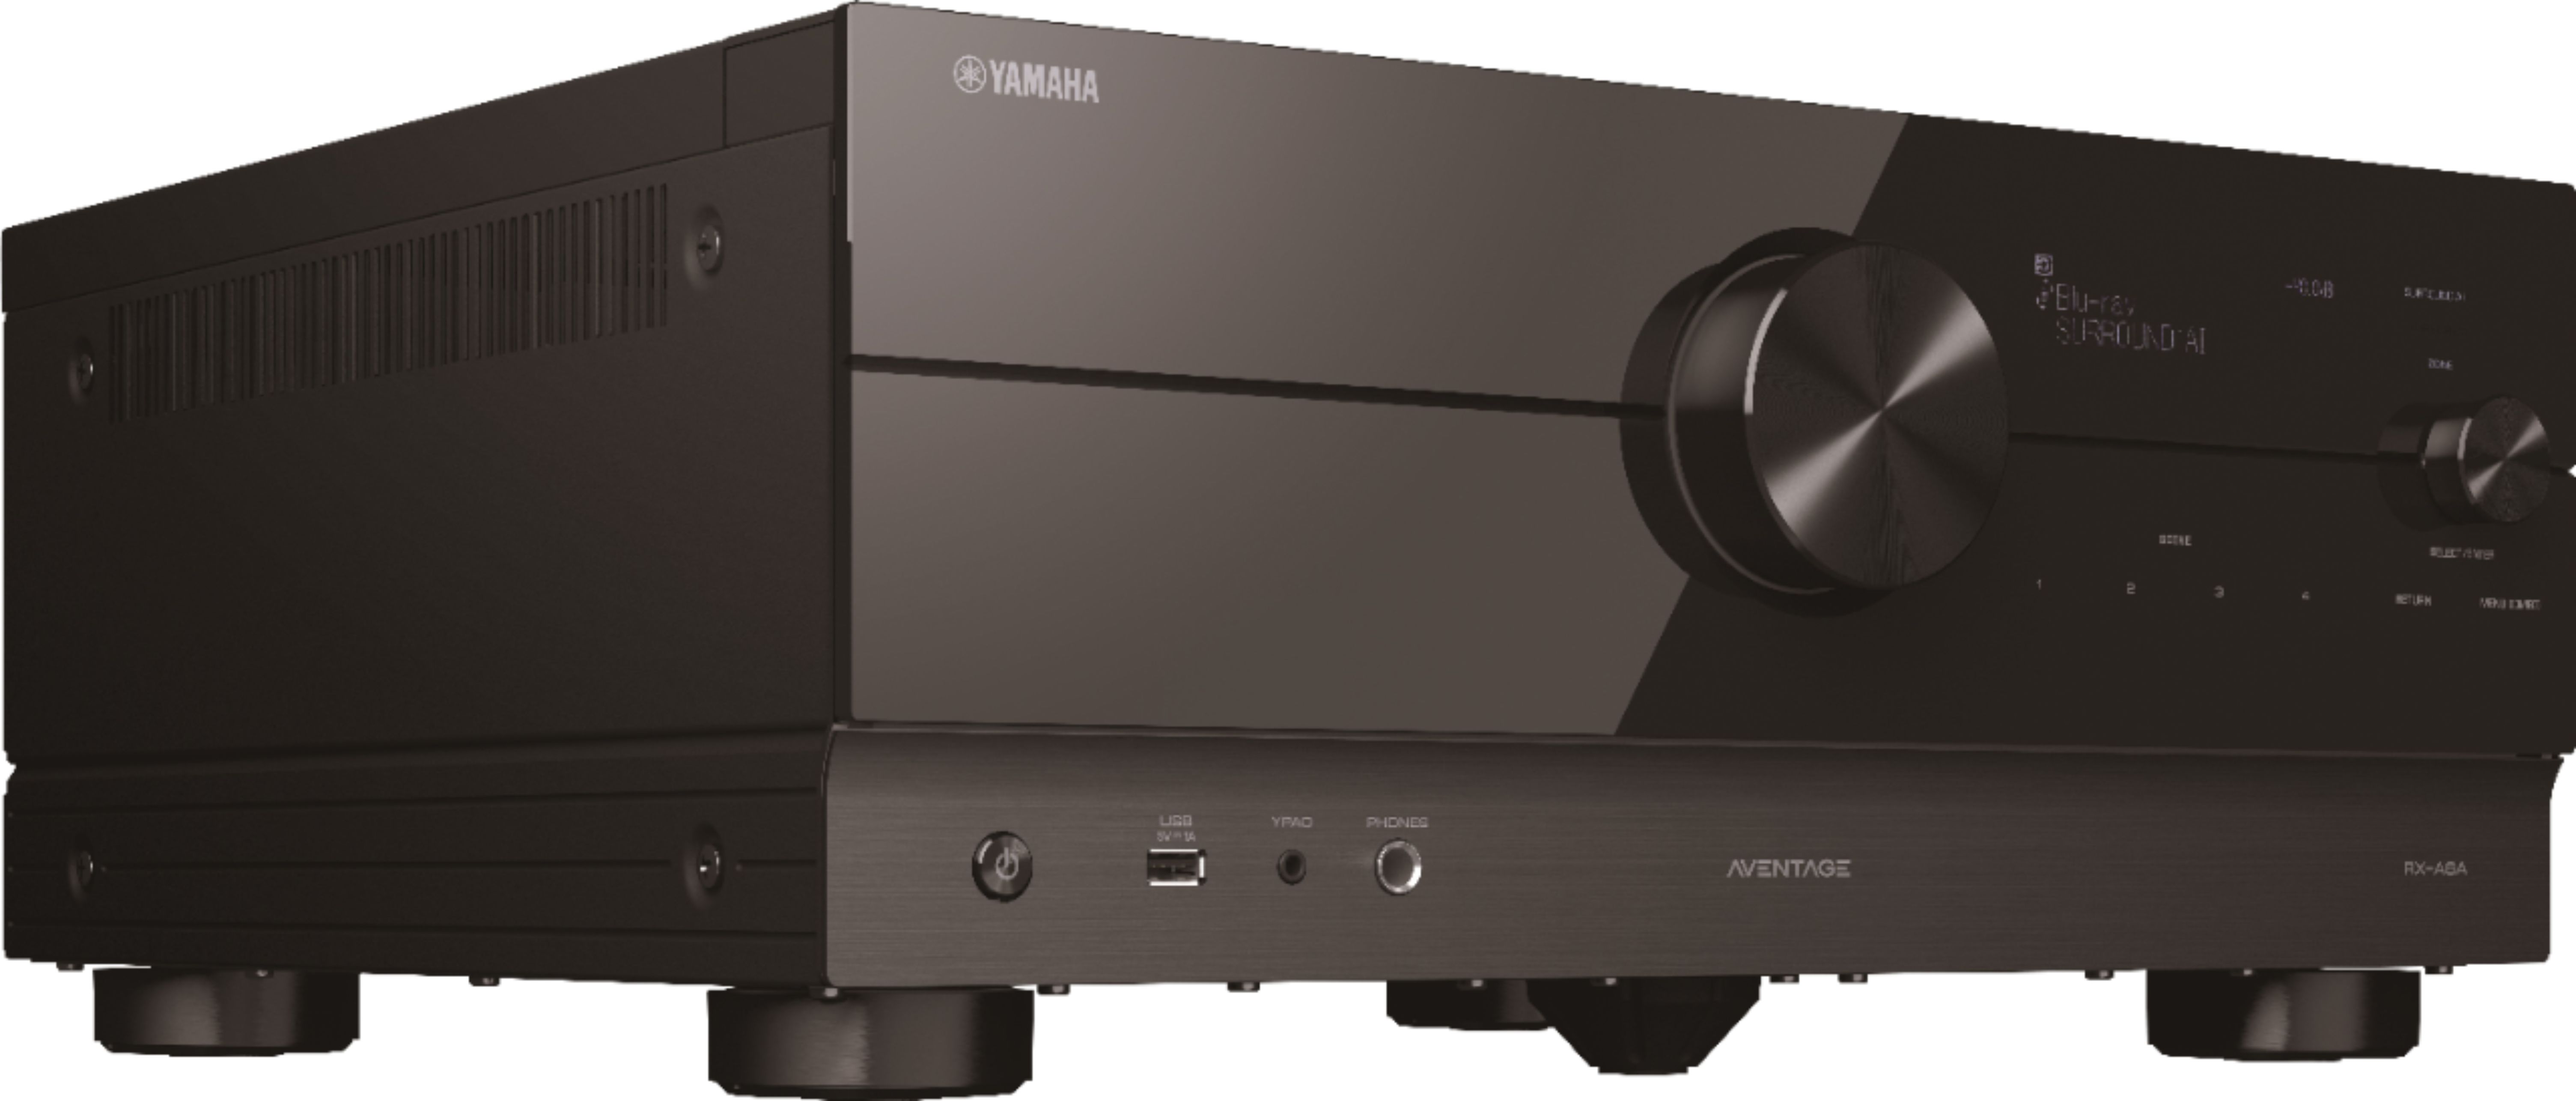 Angle View: Denon DRA-800H 2-Channel Stereo Network Receiver for Home Theater | Hi-Fi Amplification | Connects to All Audio Sources - Black